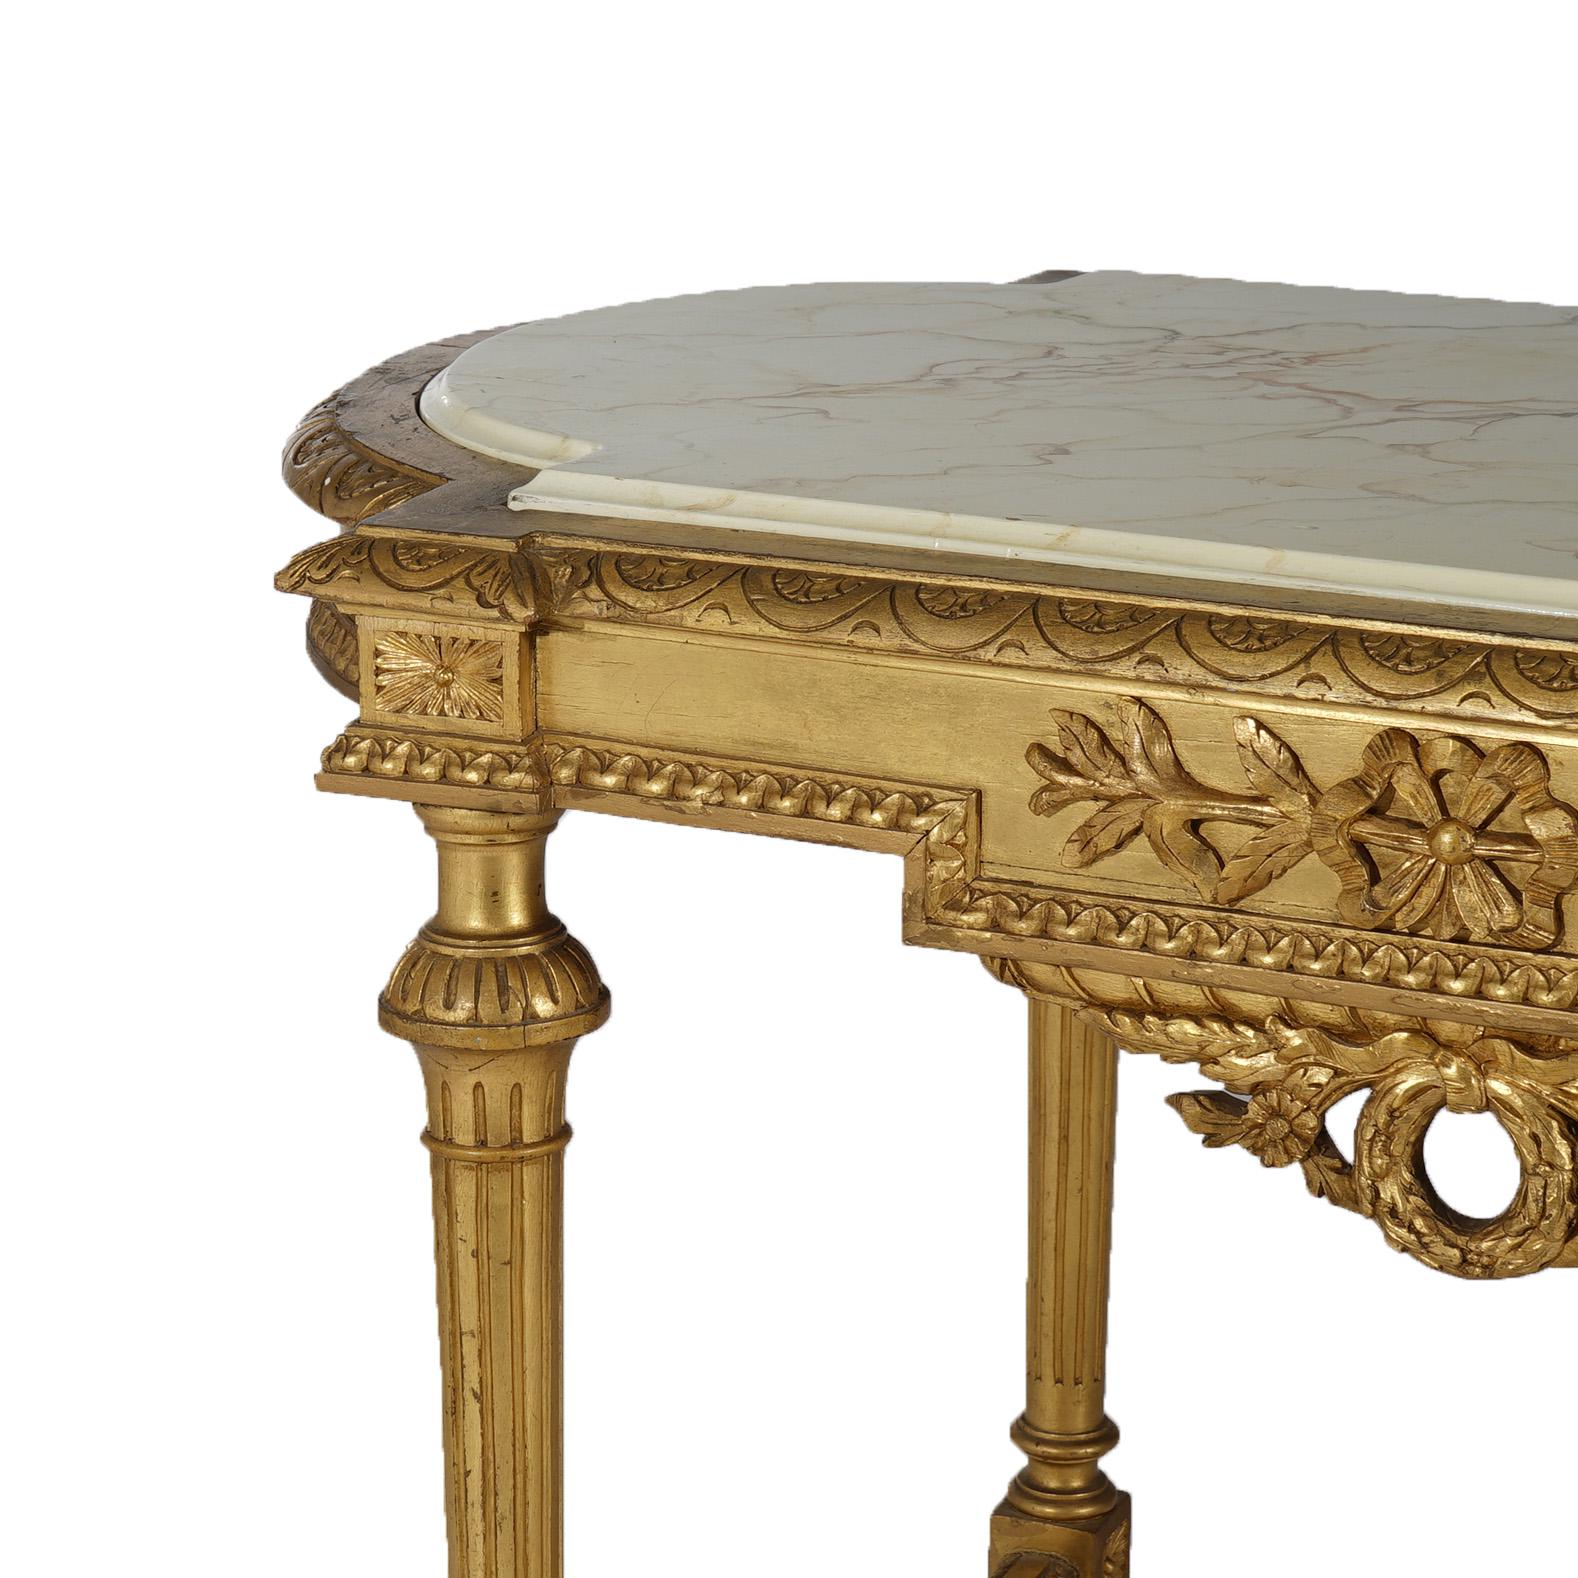 Antique French Louis XVI Style Giltwood Parlor Table with Faux Painted Top 19thC For Sale 2